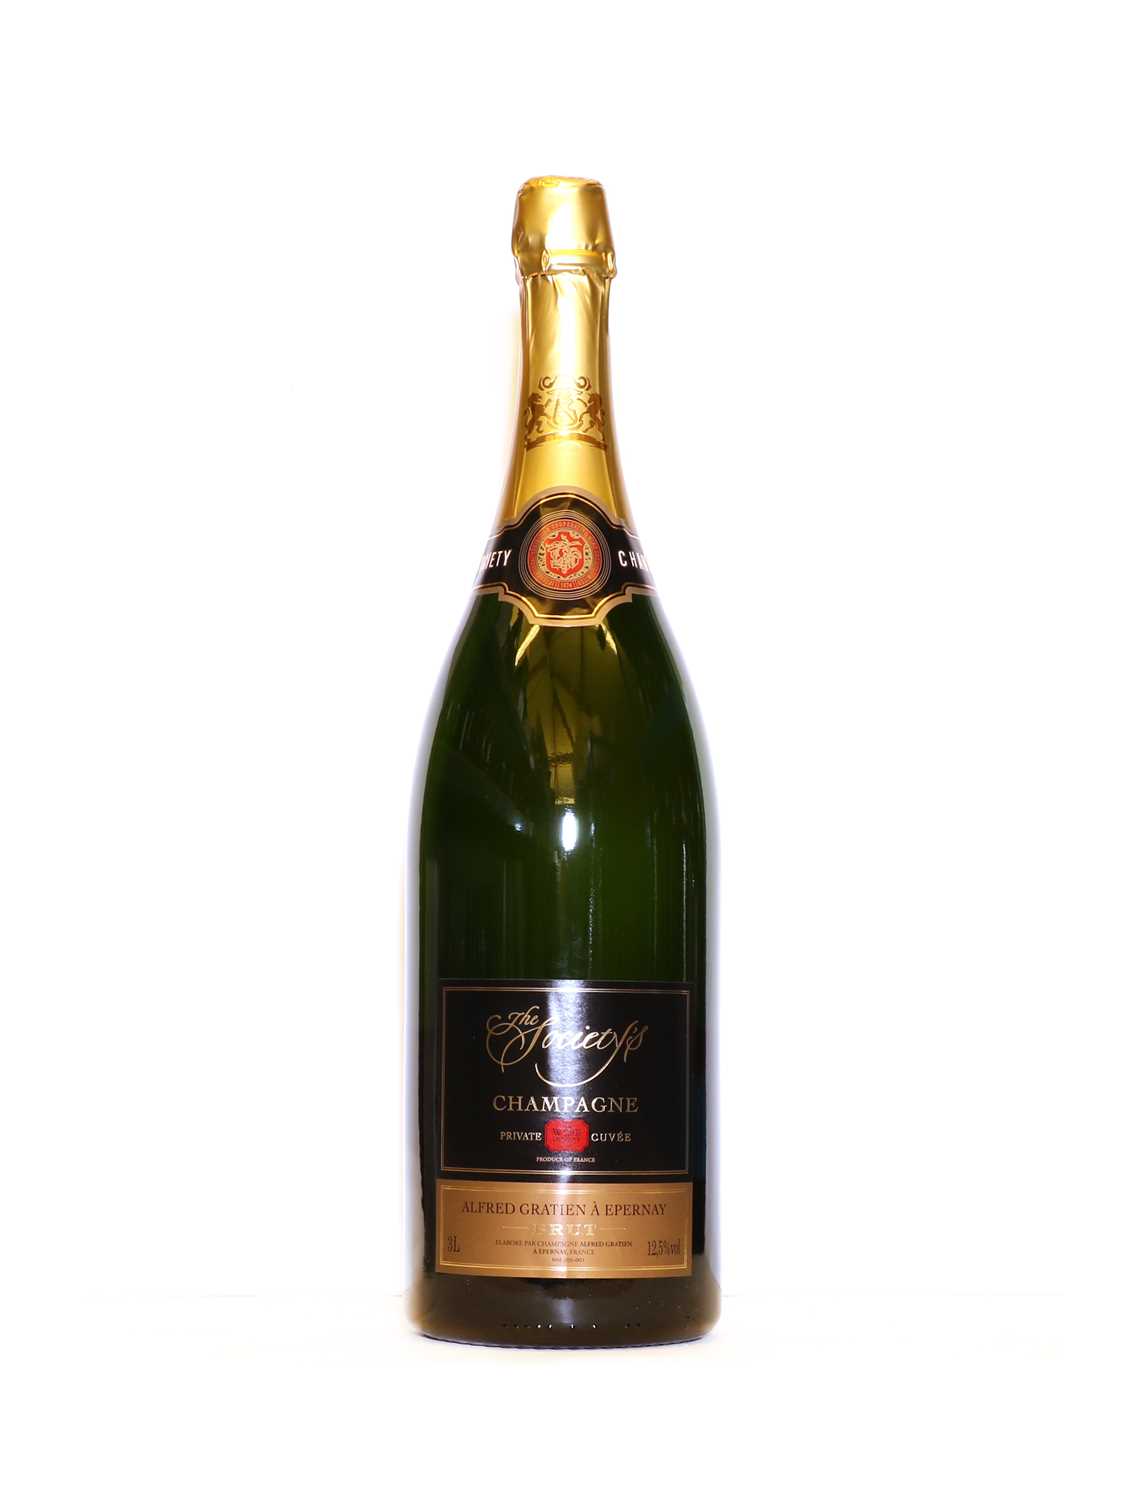 Lot 25 - Alfred Gratien, Epernay, Champagne